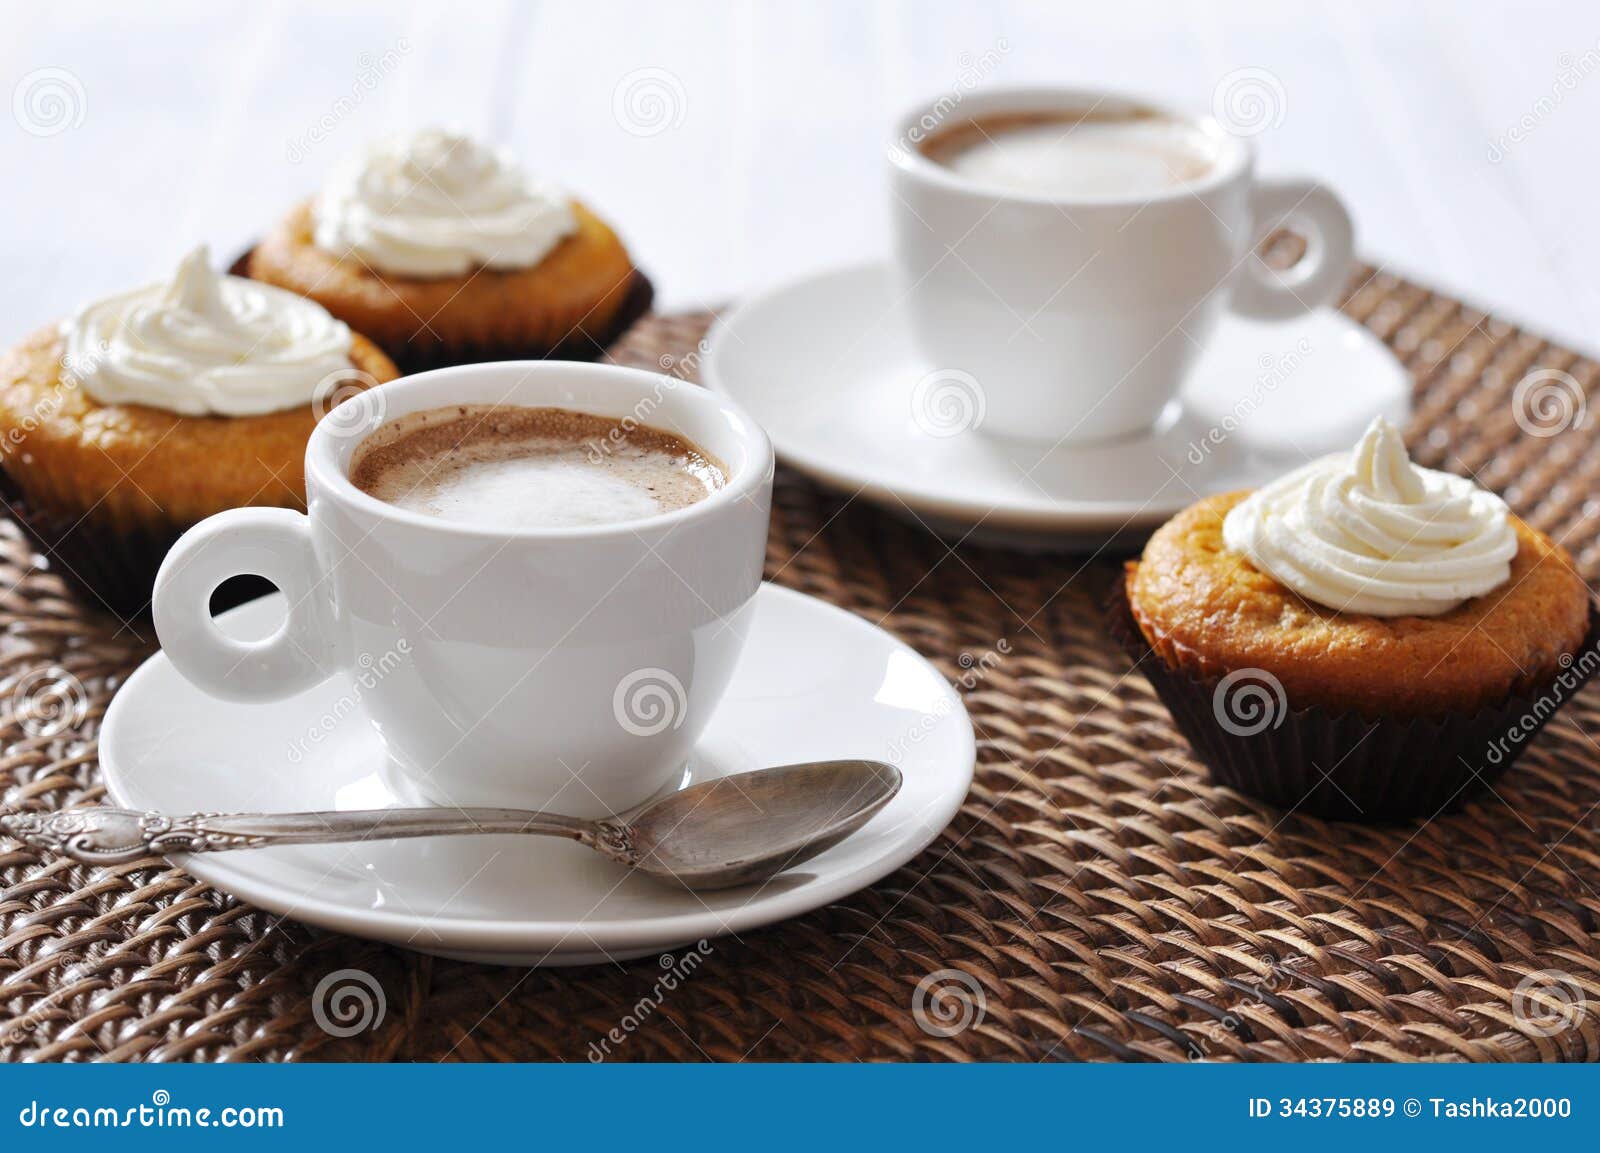 clipart muffins and coffee - photo #42